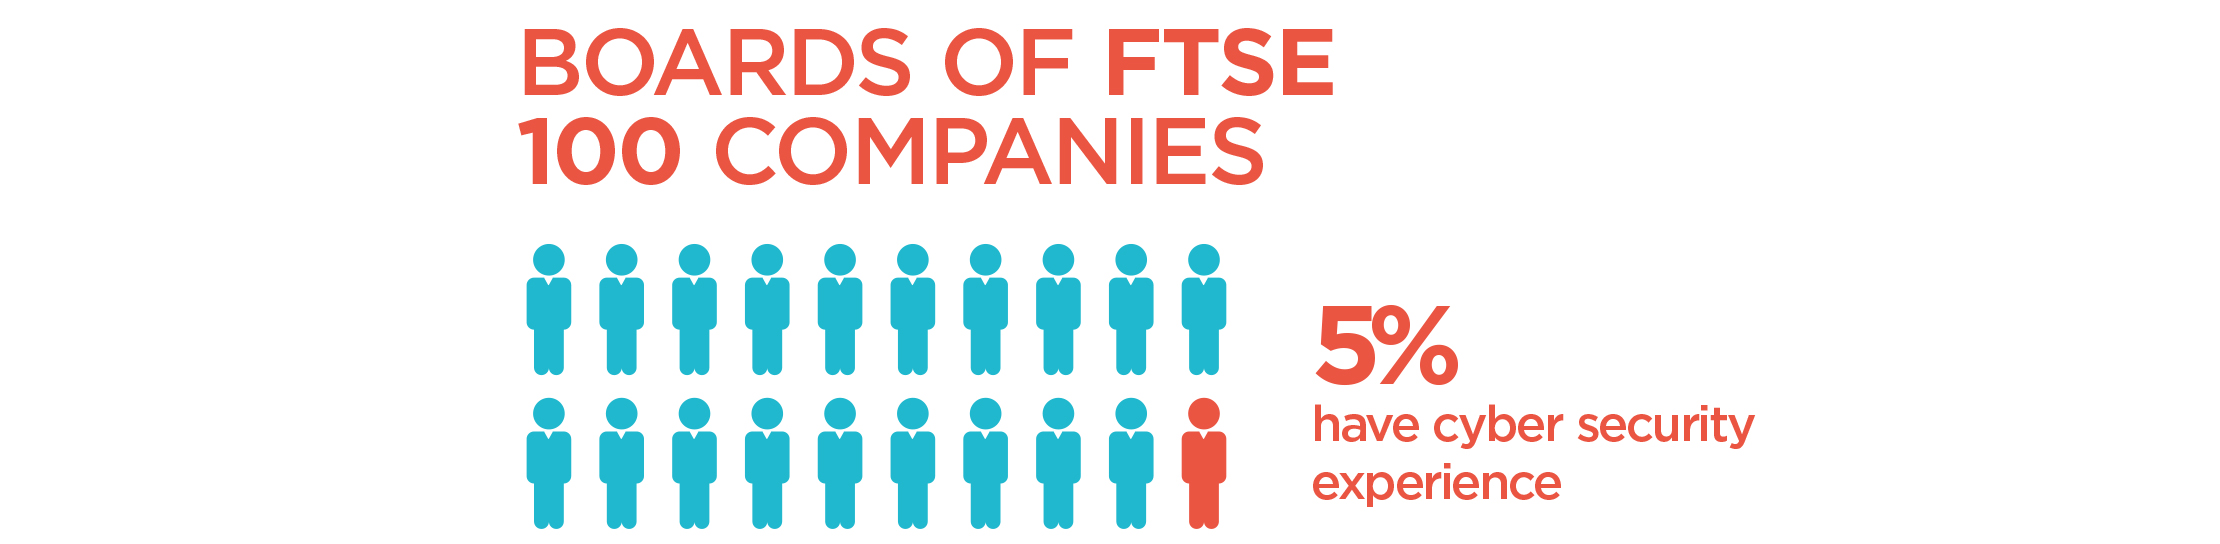 Boards of FTSE 100 Companies